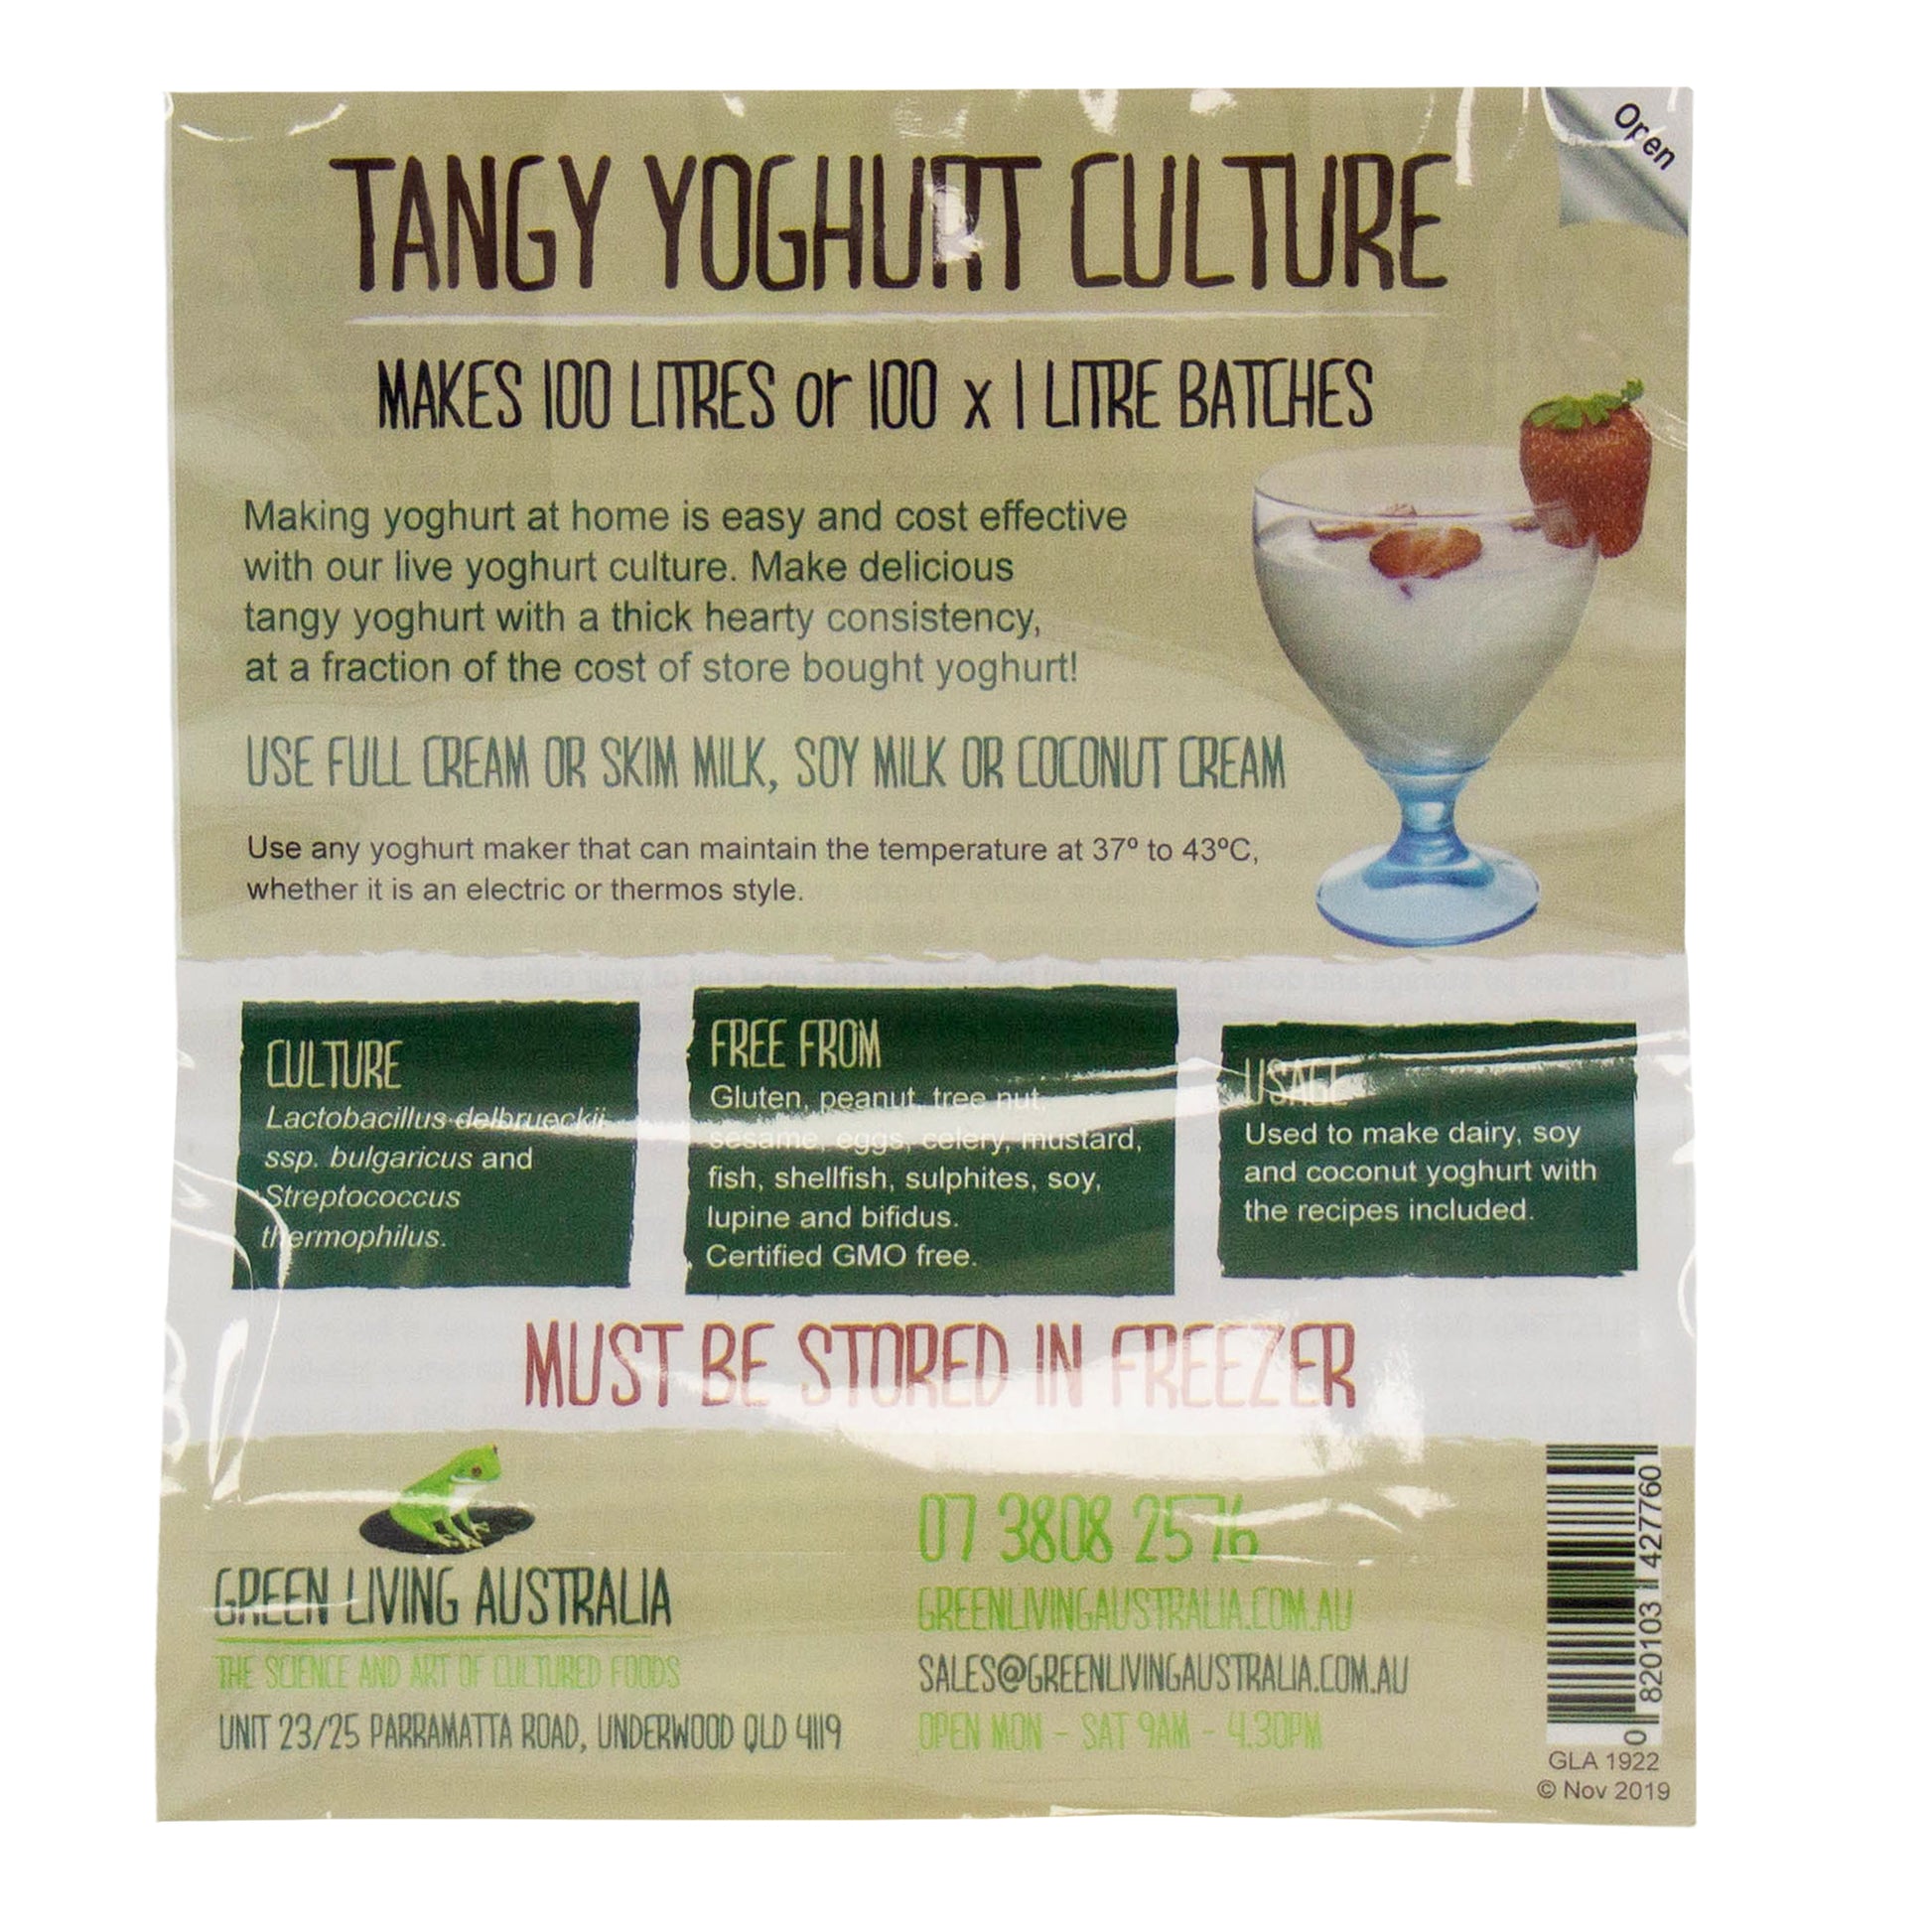 tangy yoghurt culture makes up to 100 litres using full cream or skim milk, soy milk or coconut cream. 